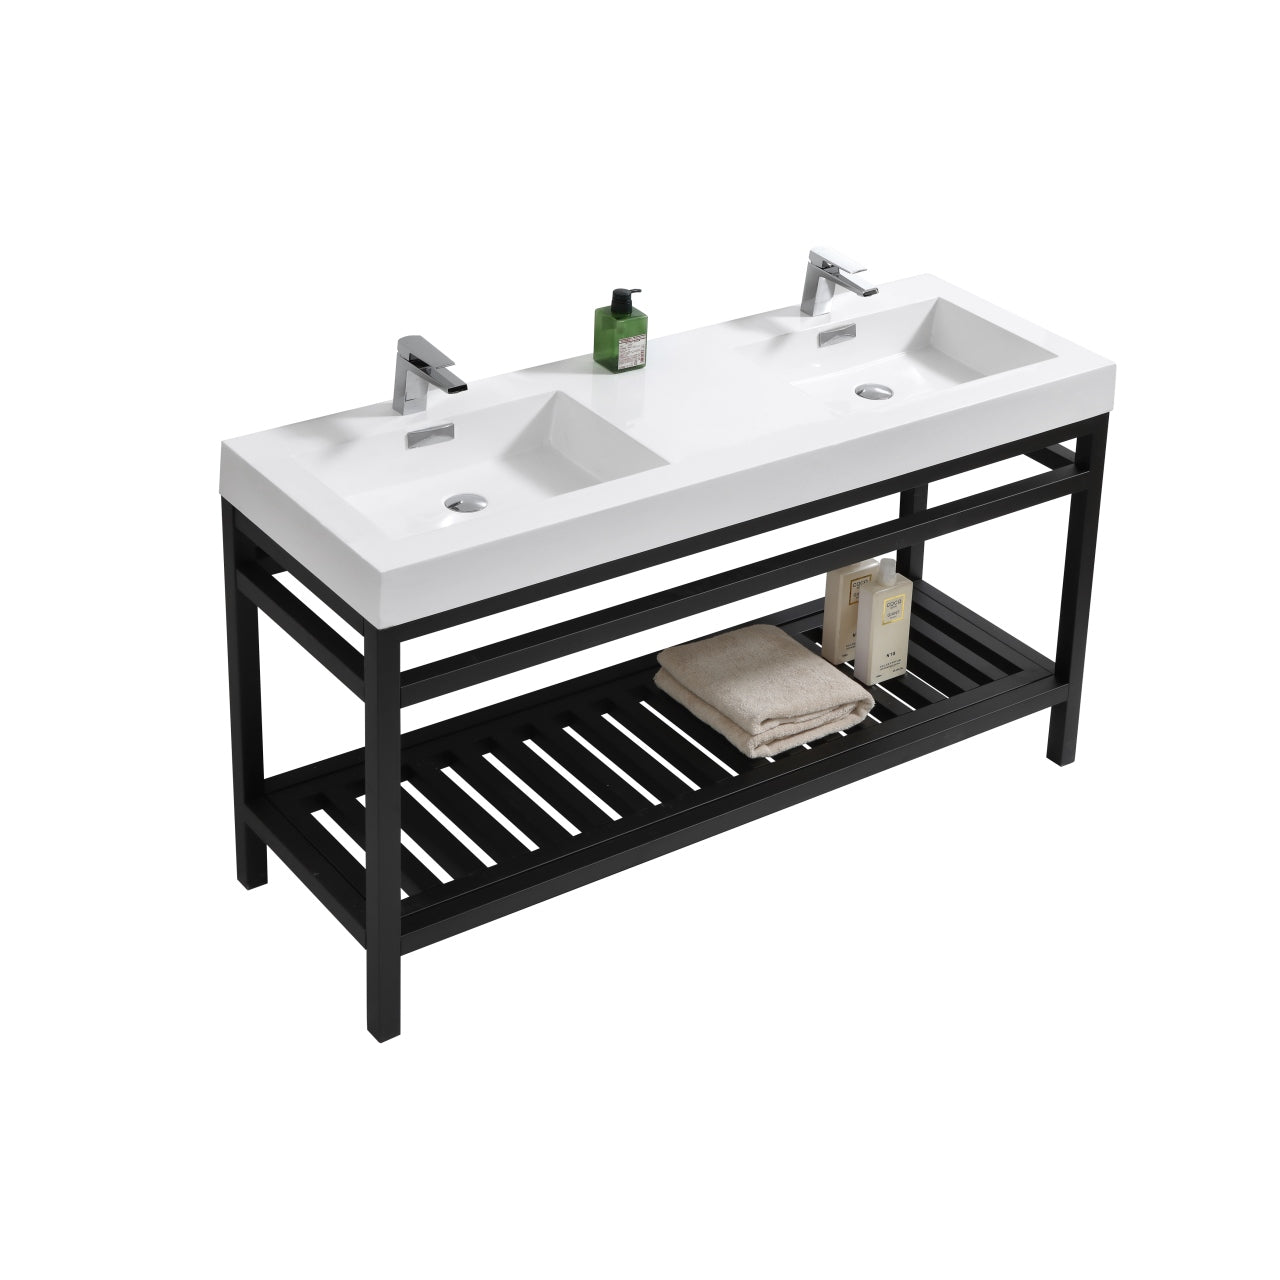 KUBEBATH Cisco AC60D-BK 60" Double Bathroom Vanity in Black with White Acrylic Composite, Integrated Sink, Angled View